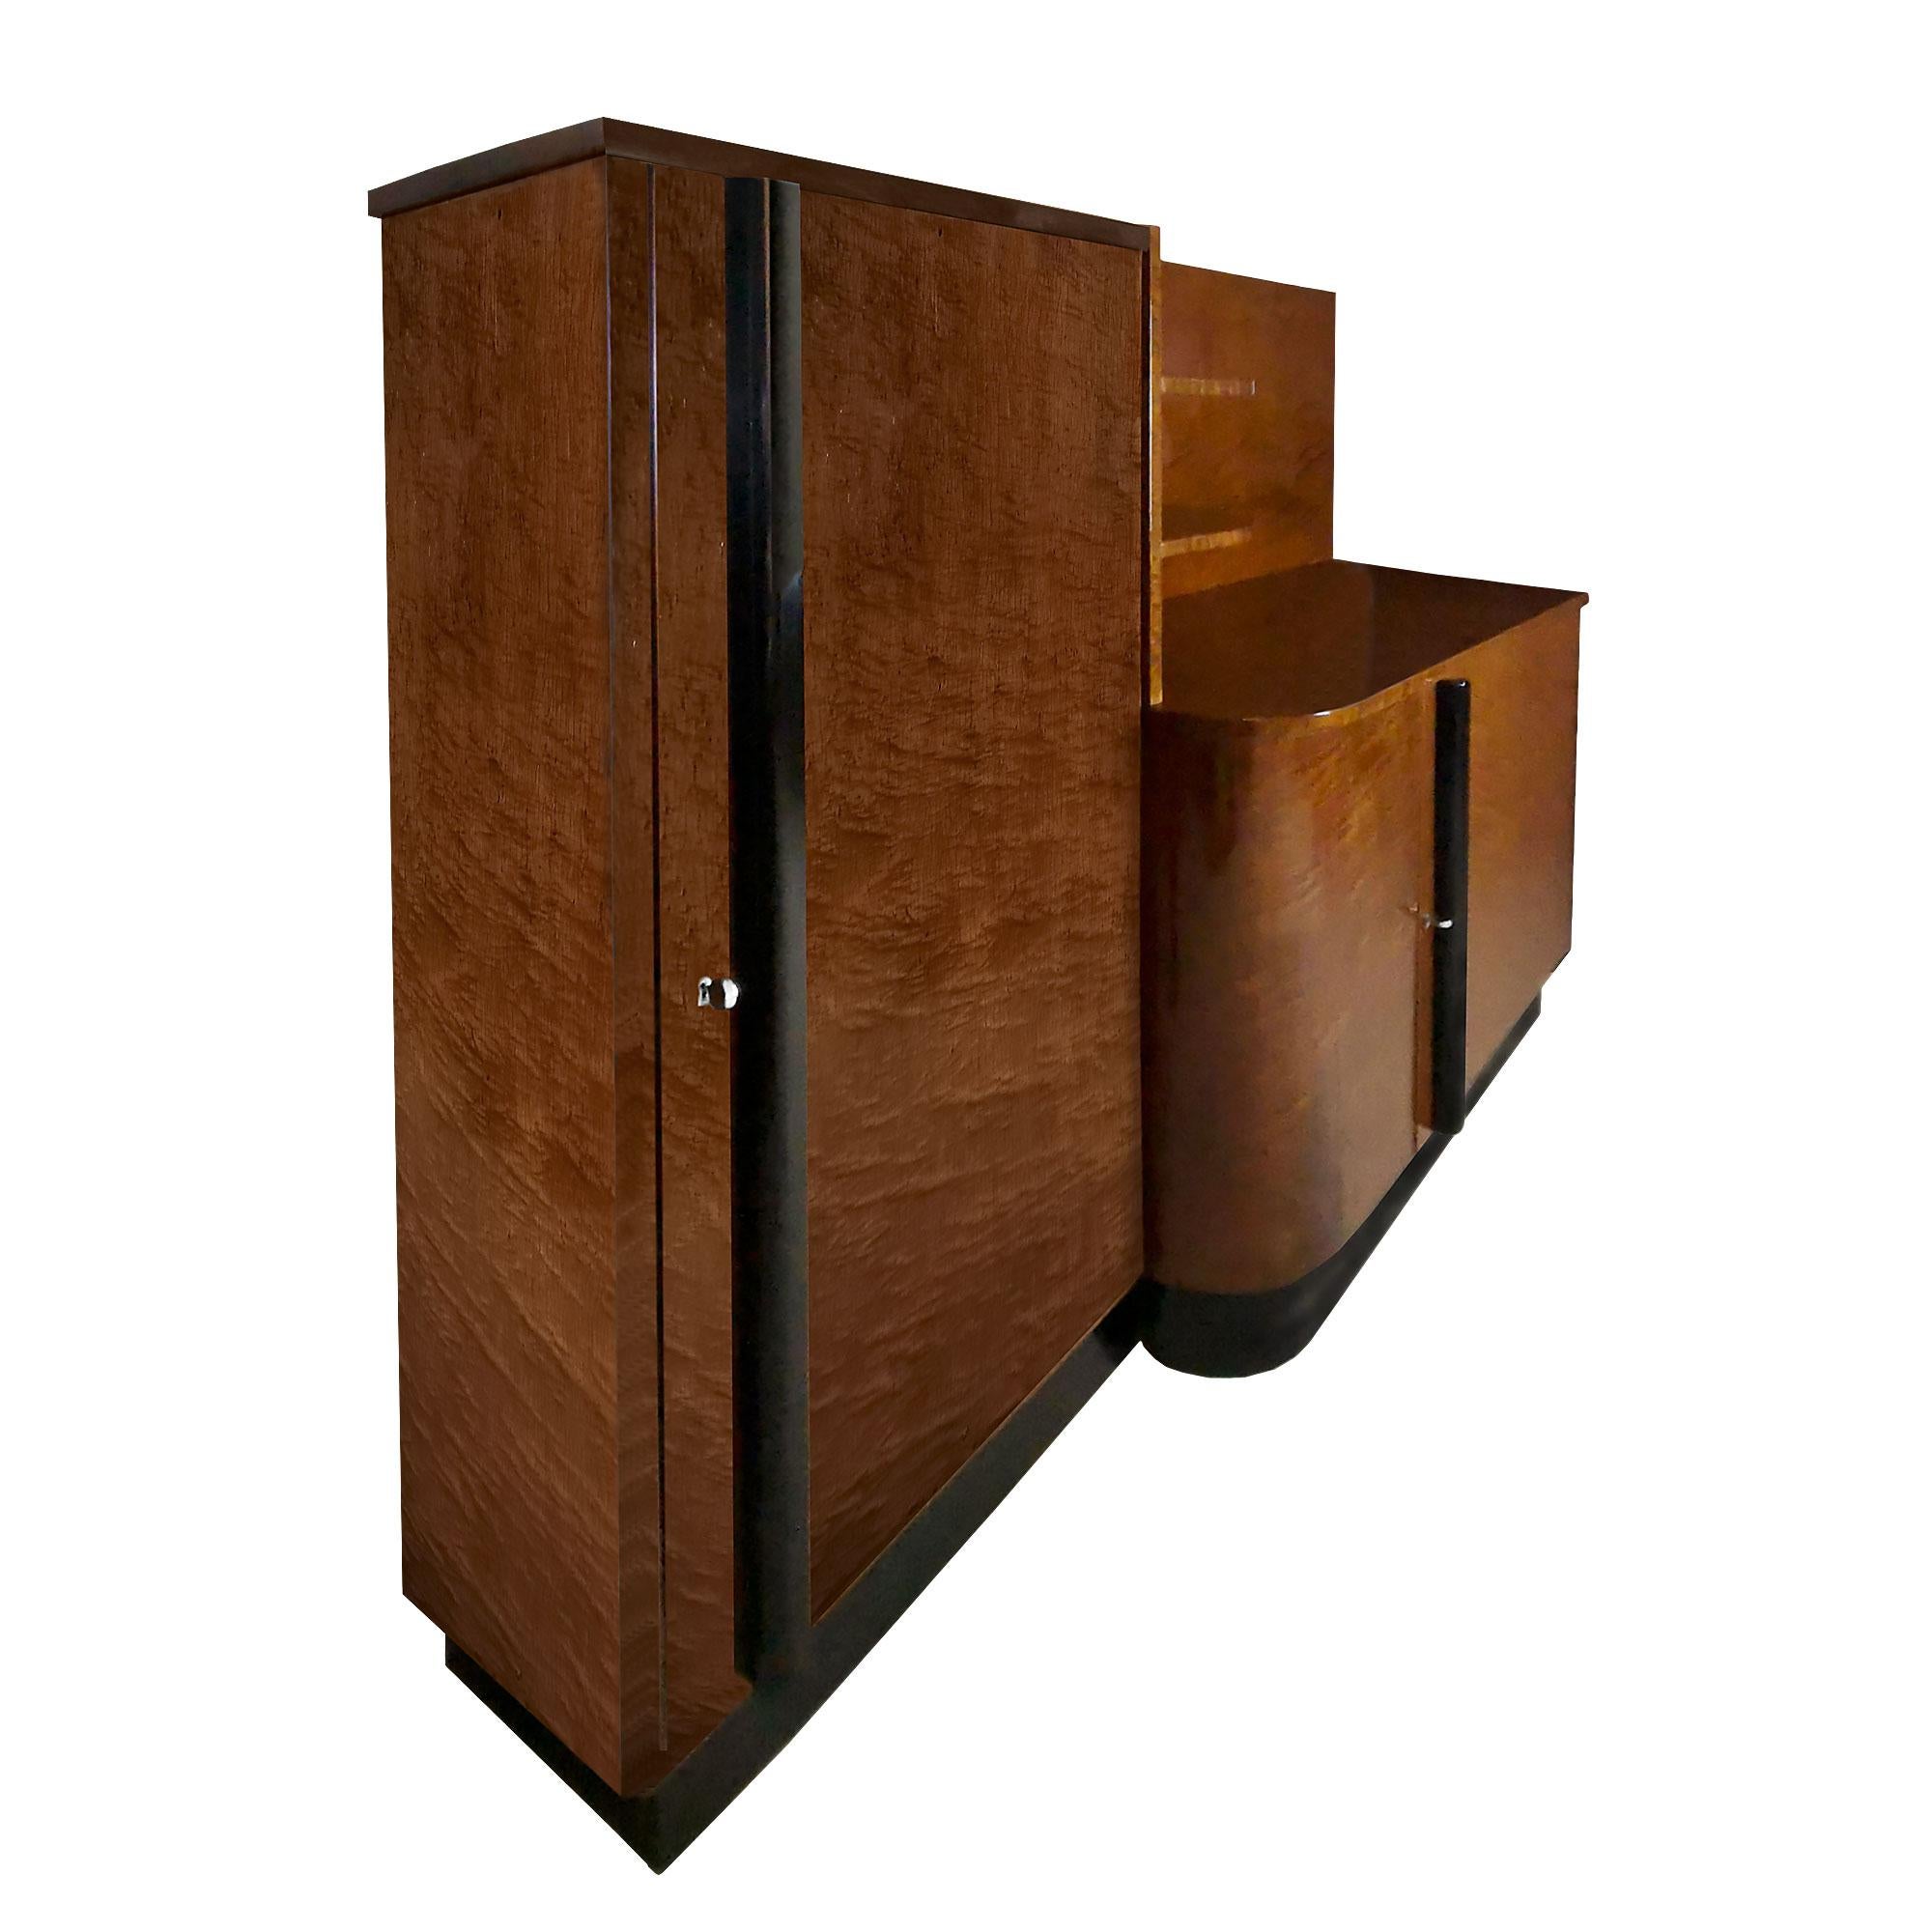 Italian Large Art Deco Sideboard Cabinet in Speckled Mahogany - Italy 1930 For Sale